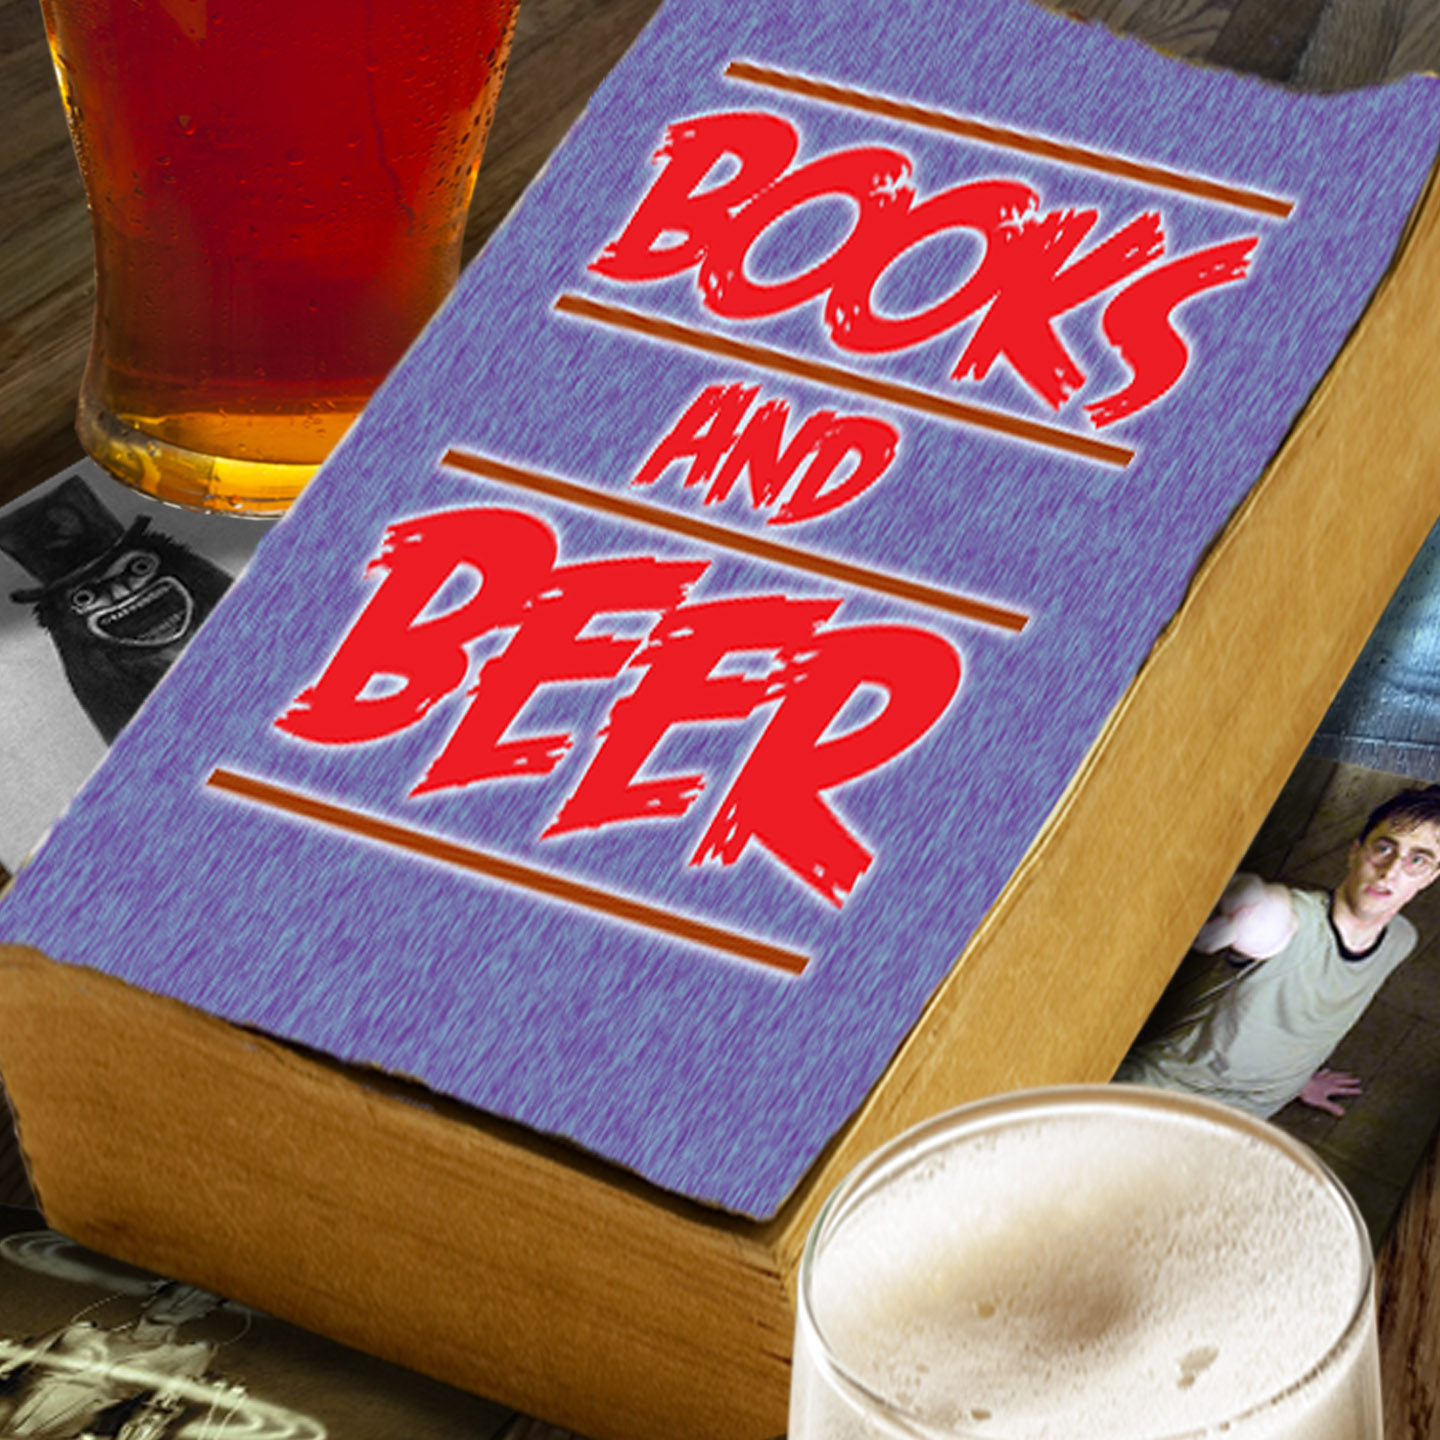 Books and Beer